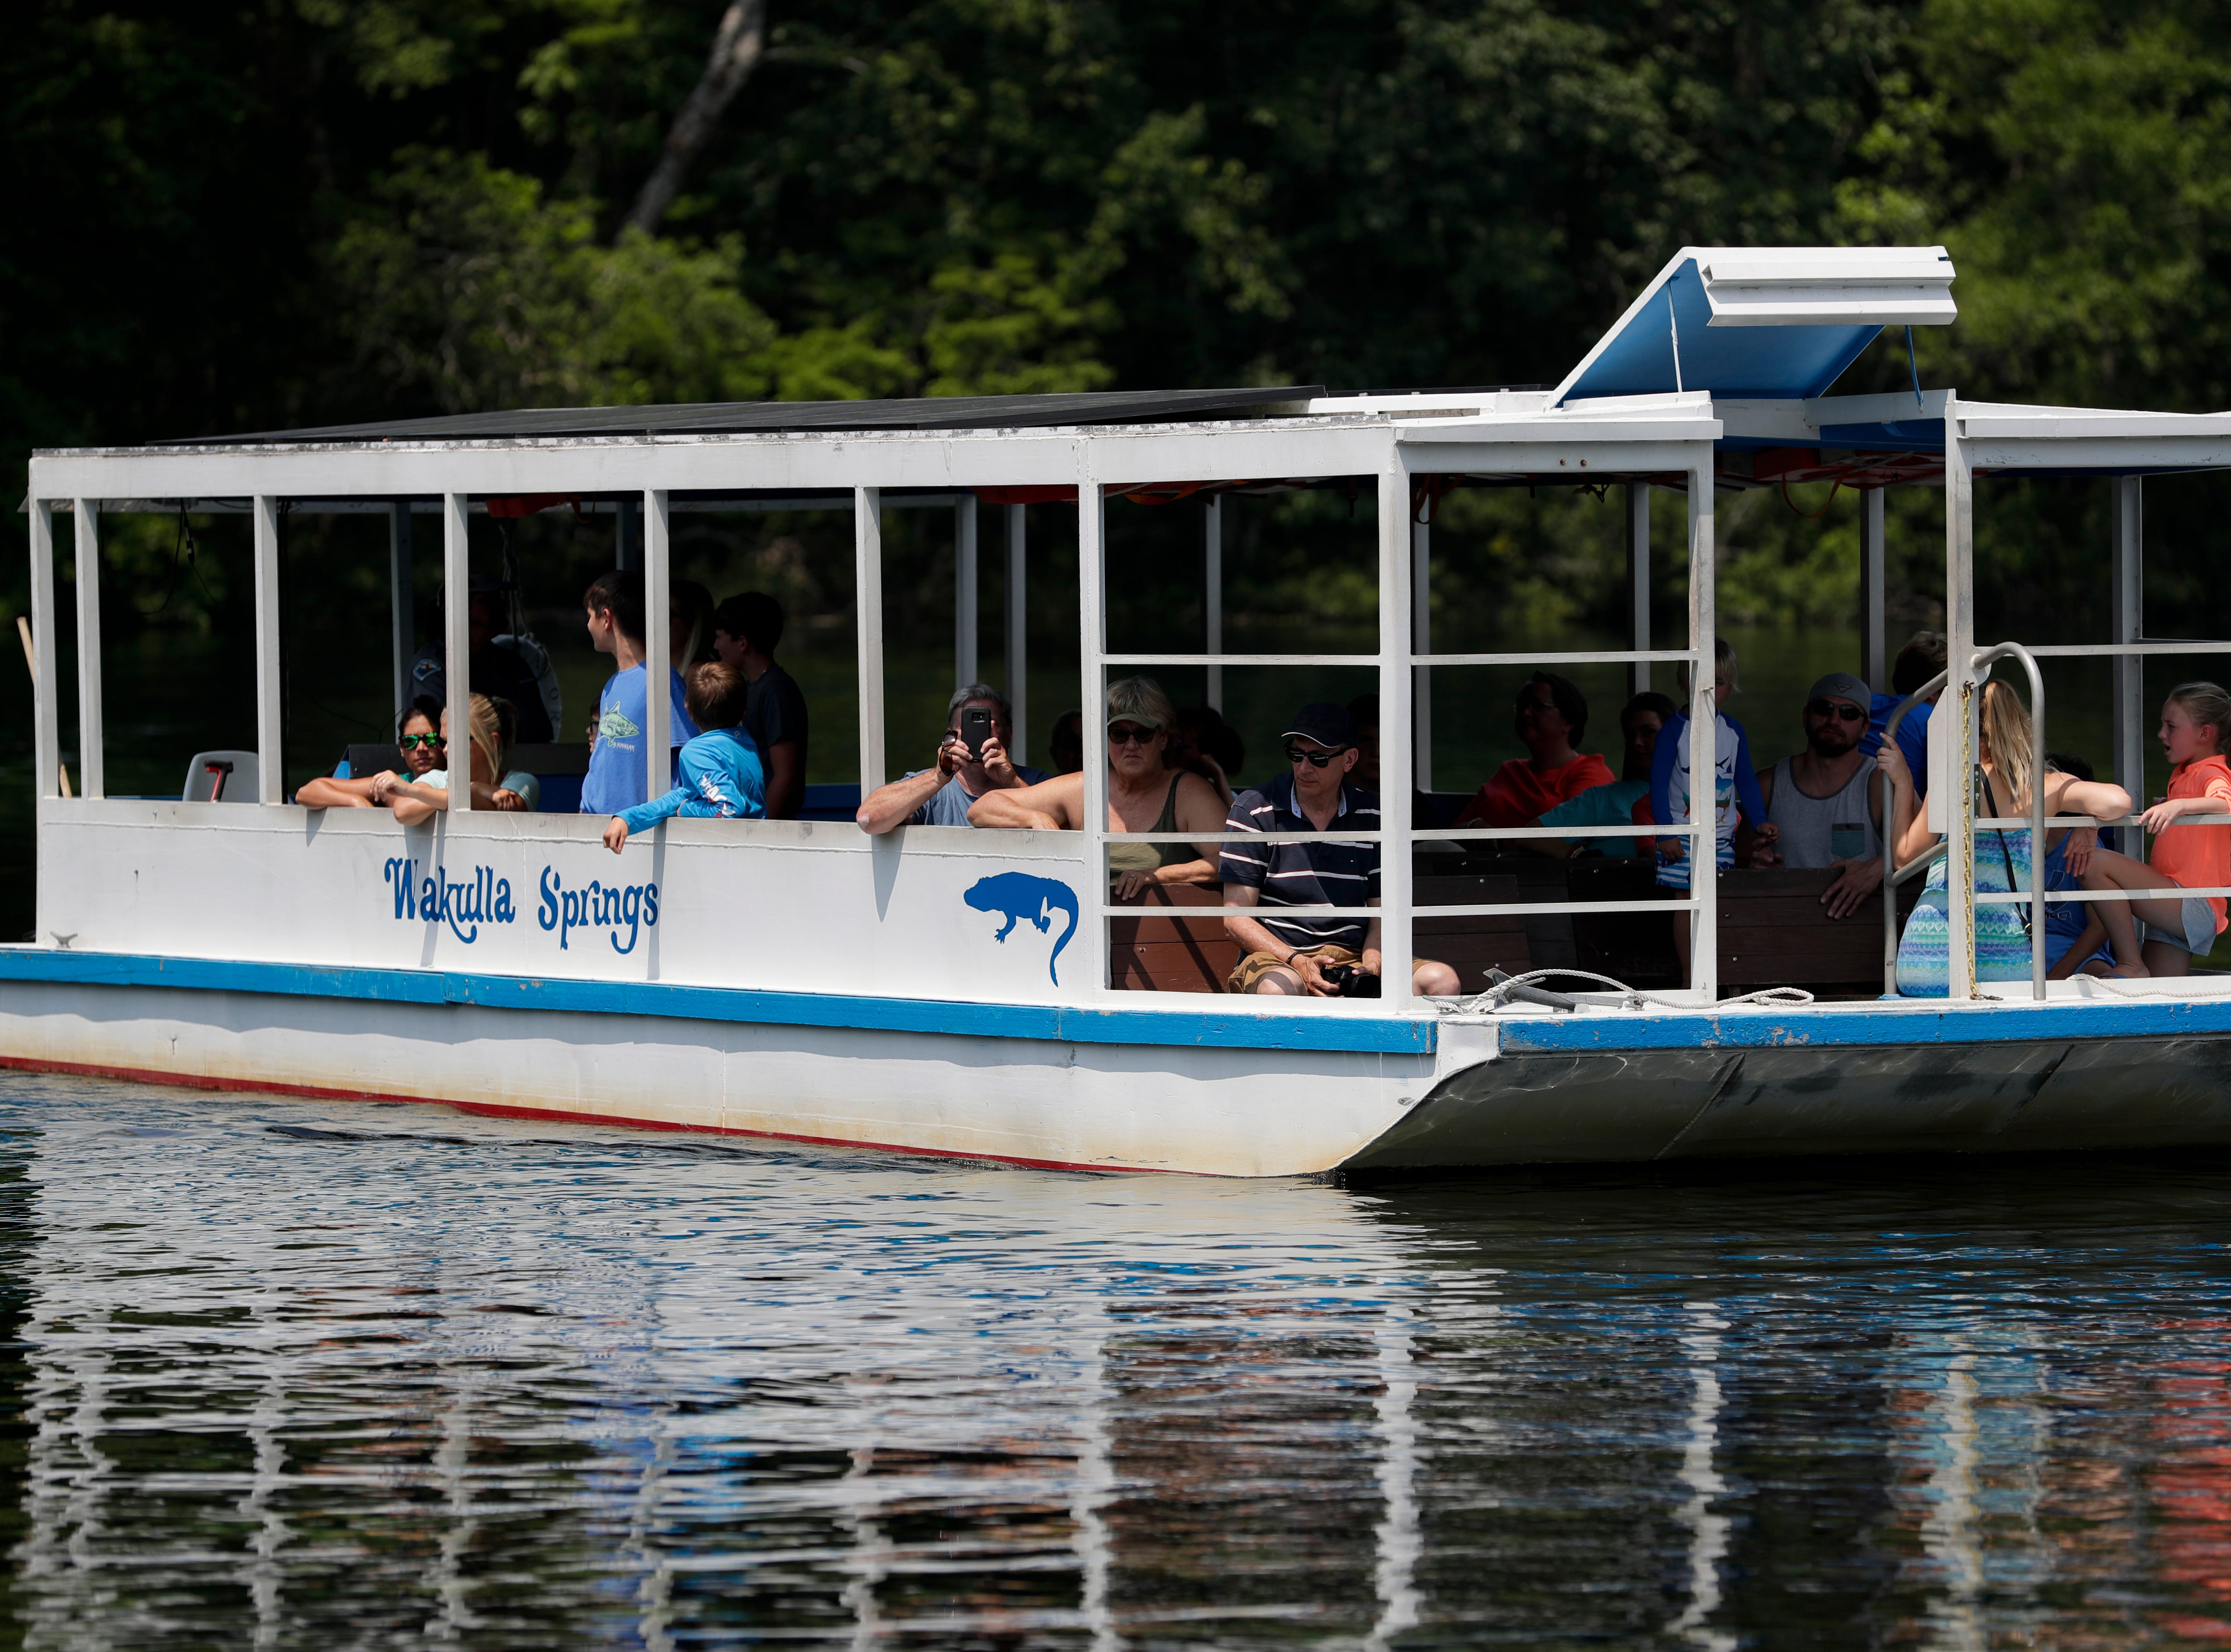 Historic boat tours are popular experiences at Wakulla Springs State Park. The 45-55 minute tours include a two-mile float downstream and back to view the park's wildlife like alligators, birds, fish and even manatees. 